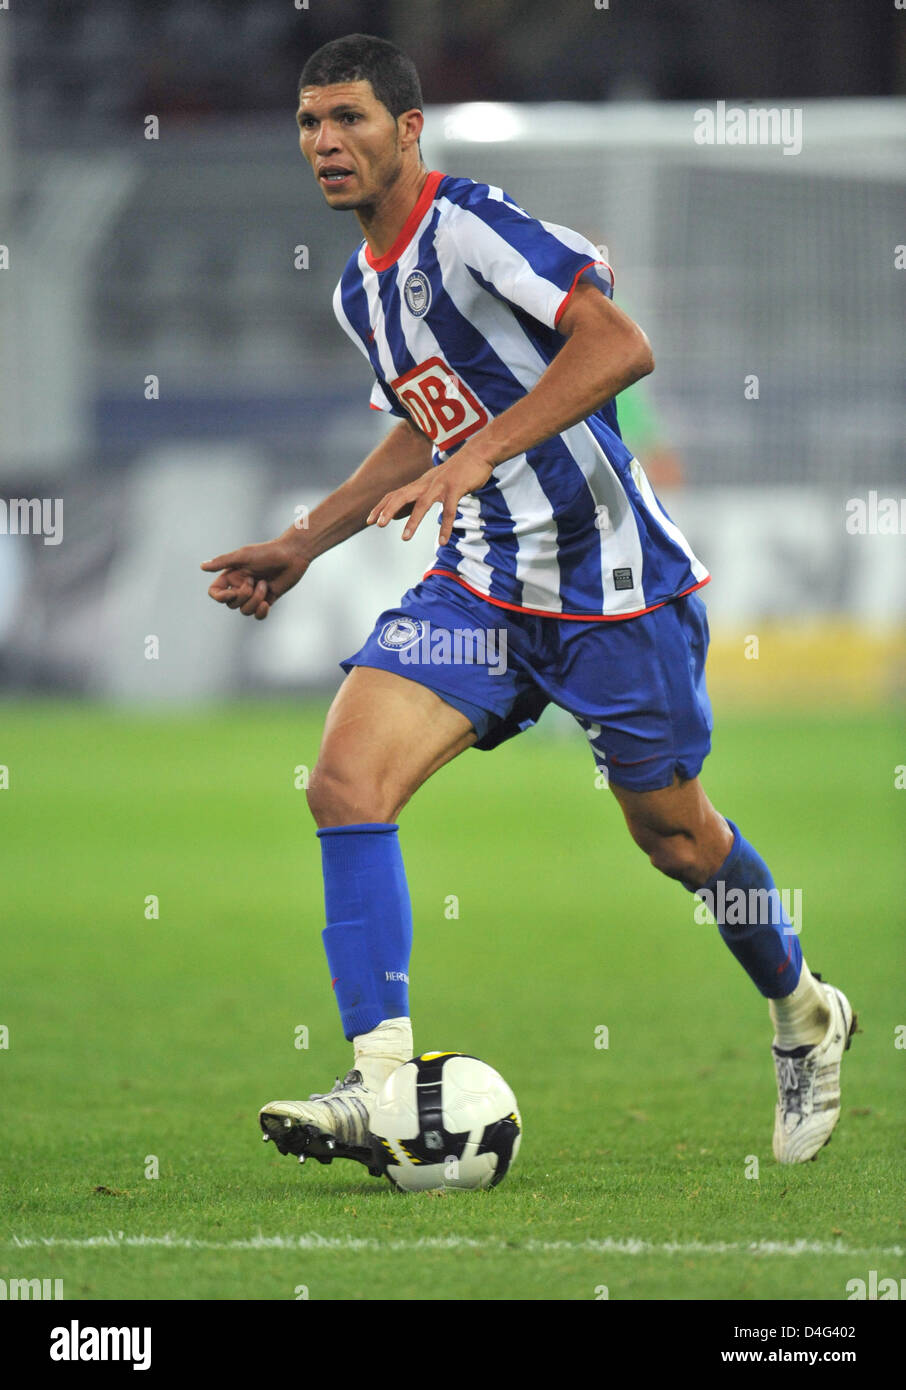 Brazilian Kaka of Hertha BSC Berlin is shown in action during the second round of the German Football Federation's DFB Cup vs Borussia Dortmund at Signal Iduna Park in Dortmund, Germany, 24 September 2008. Dortmund defeated Berlin 2-1. Photo: Bernd Thissen Stock Photo